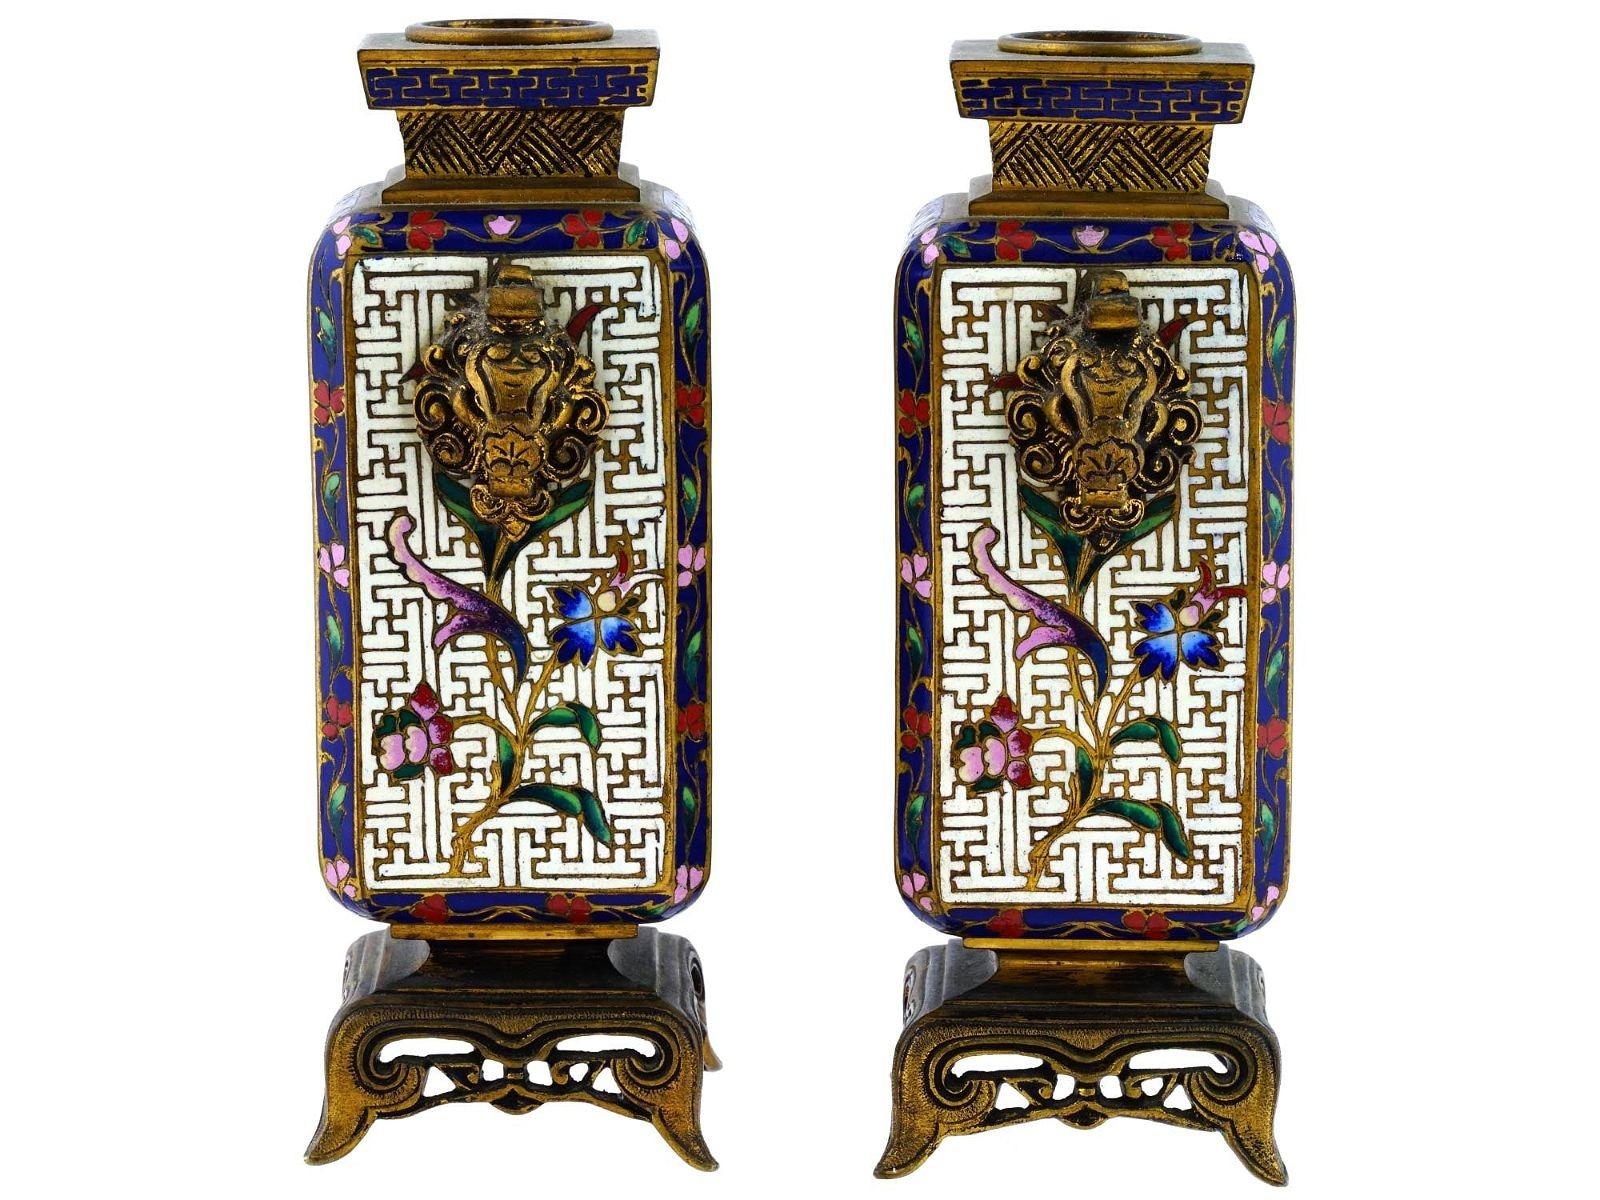 Pair of exceptional antique (late 19th century) French gilt bronze vases in the Chinoiserie style with fine cloisonne enamel designs of flowers on a geometric ground with stylized lion masks at the sides and raised on openwork feet.  Unsigned.